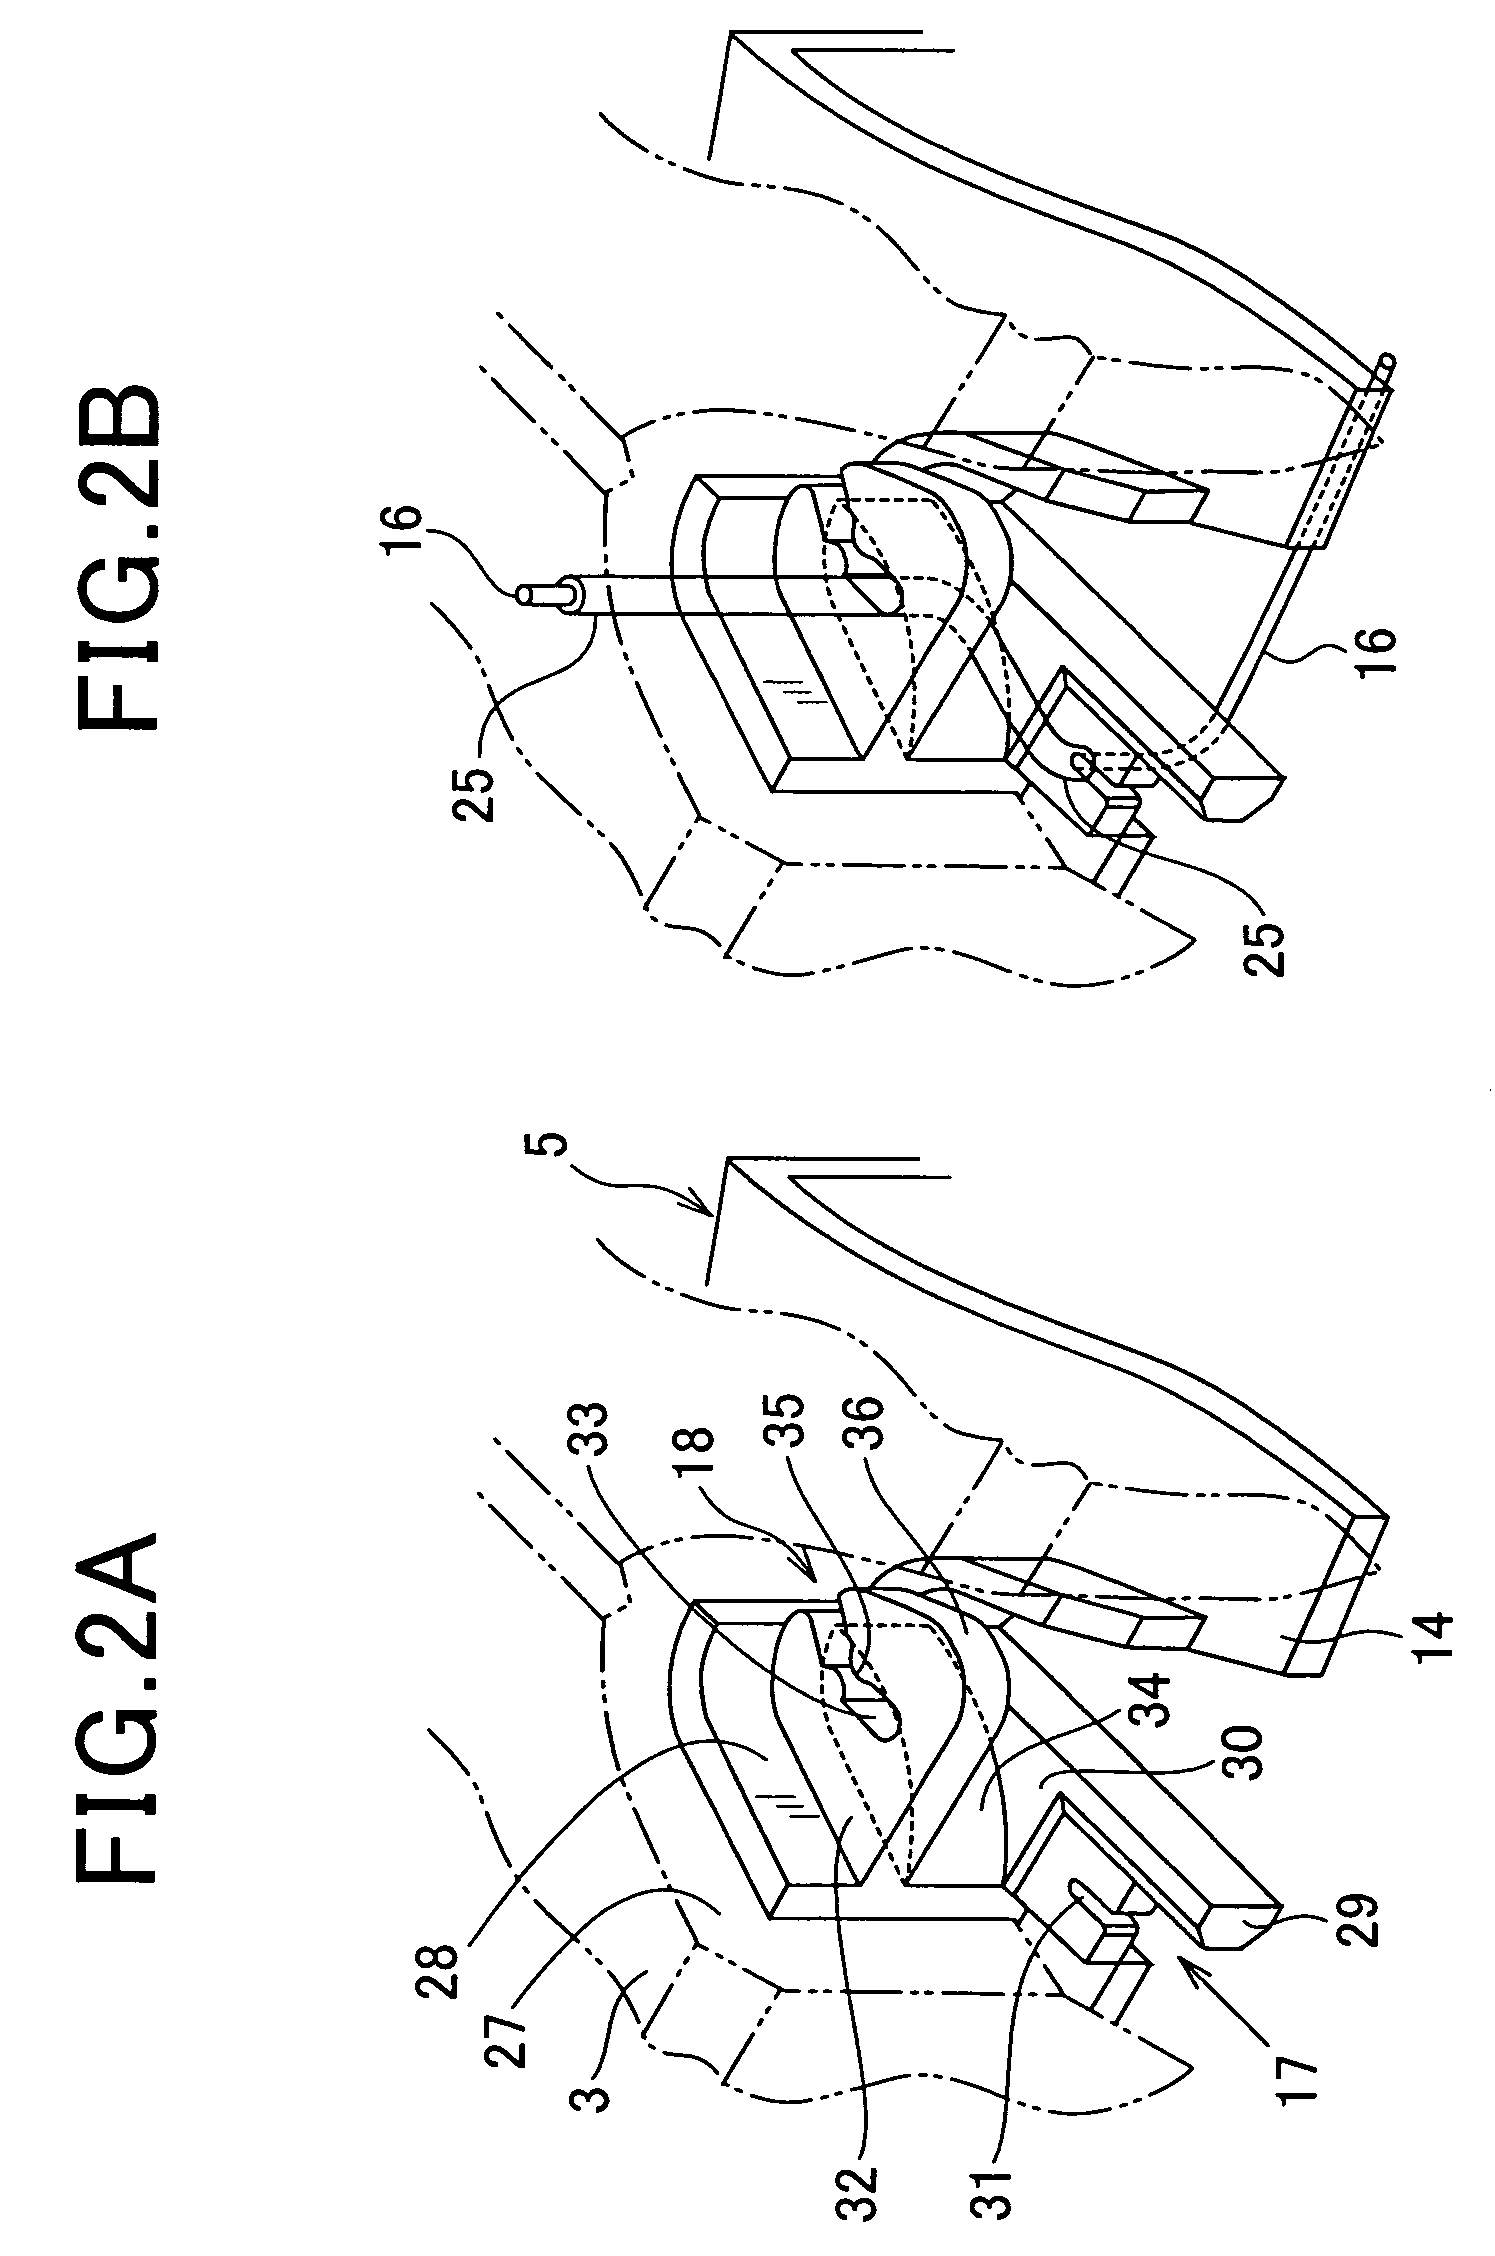 Rotor for rotating electrical machine and method of manufacturing same